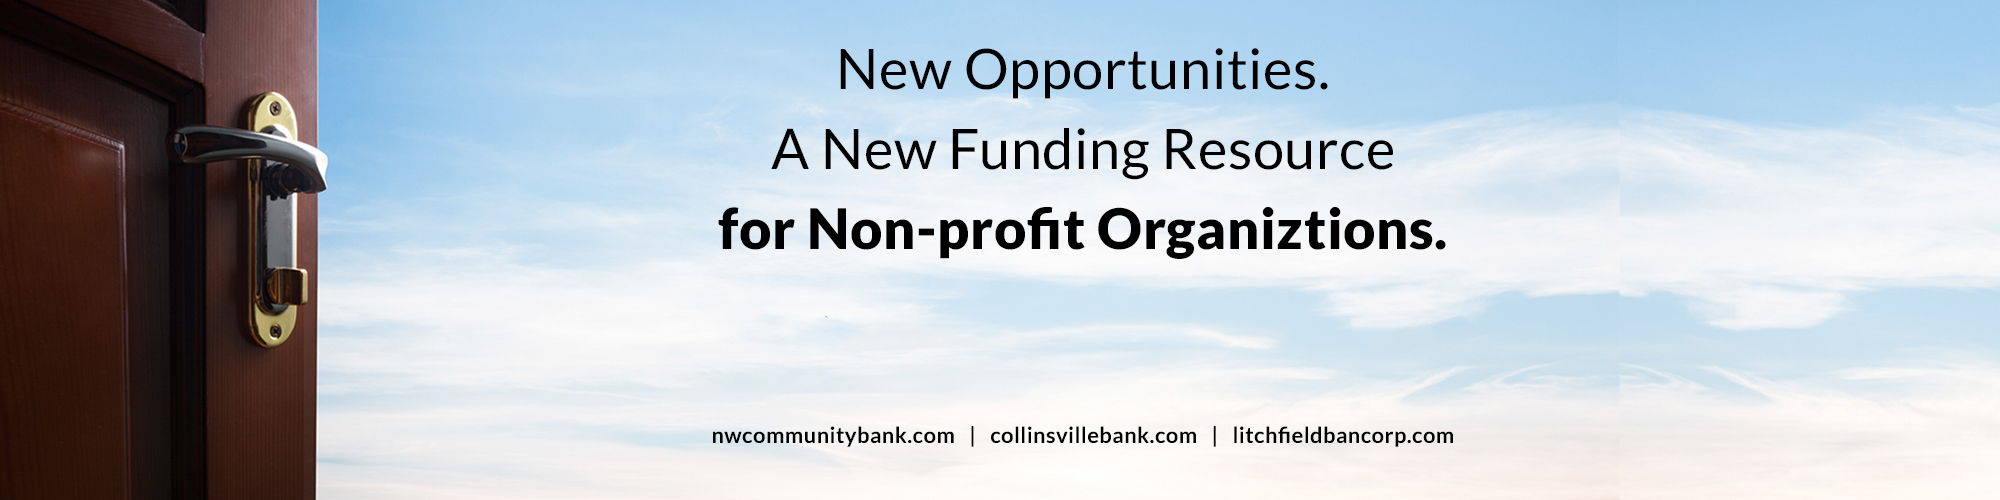 Door with text "New Opportunities. A New Funding Resource for Non-profit Organiztions."